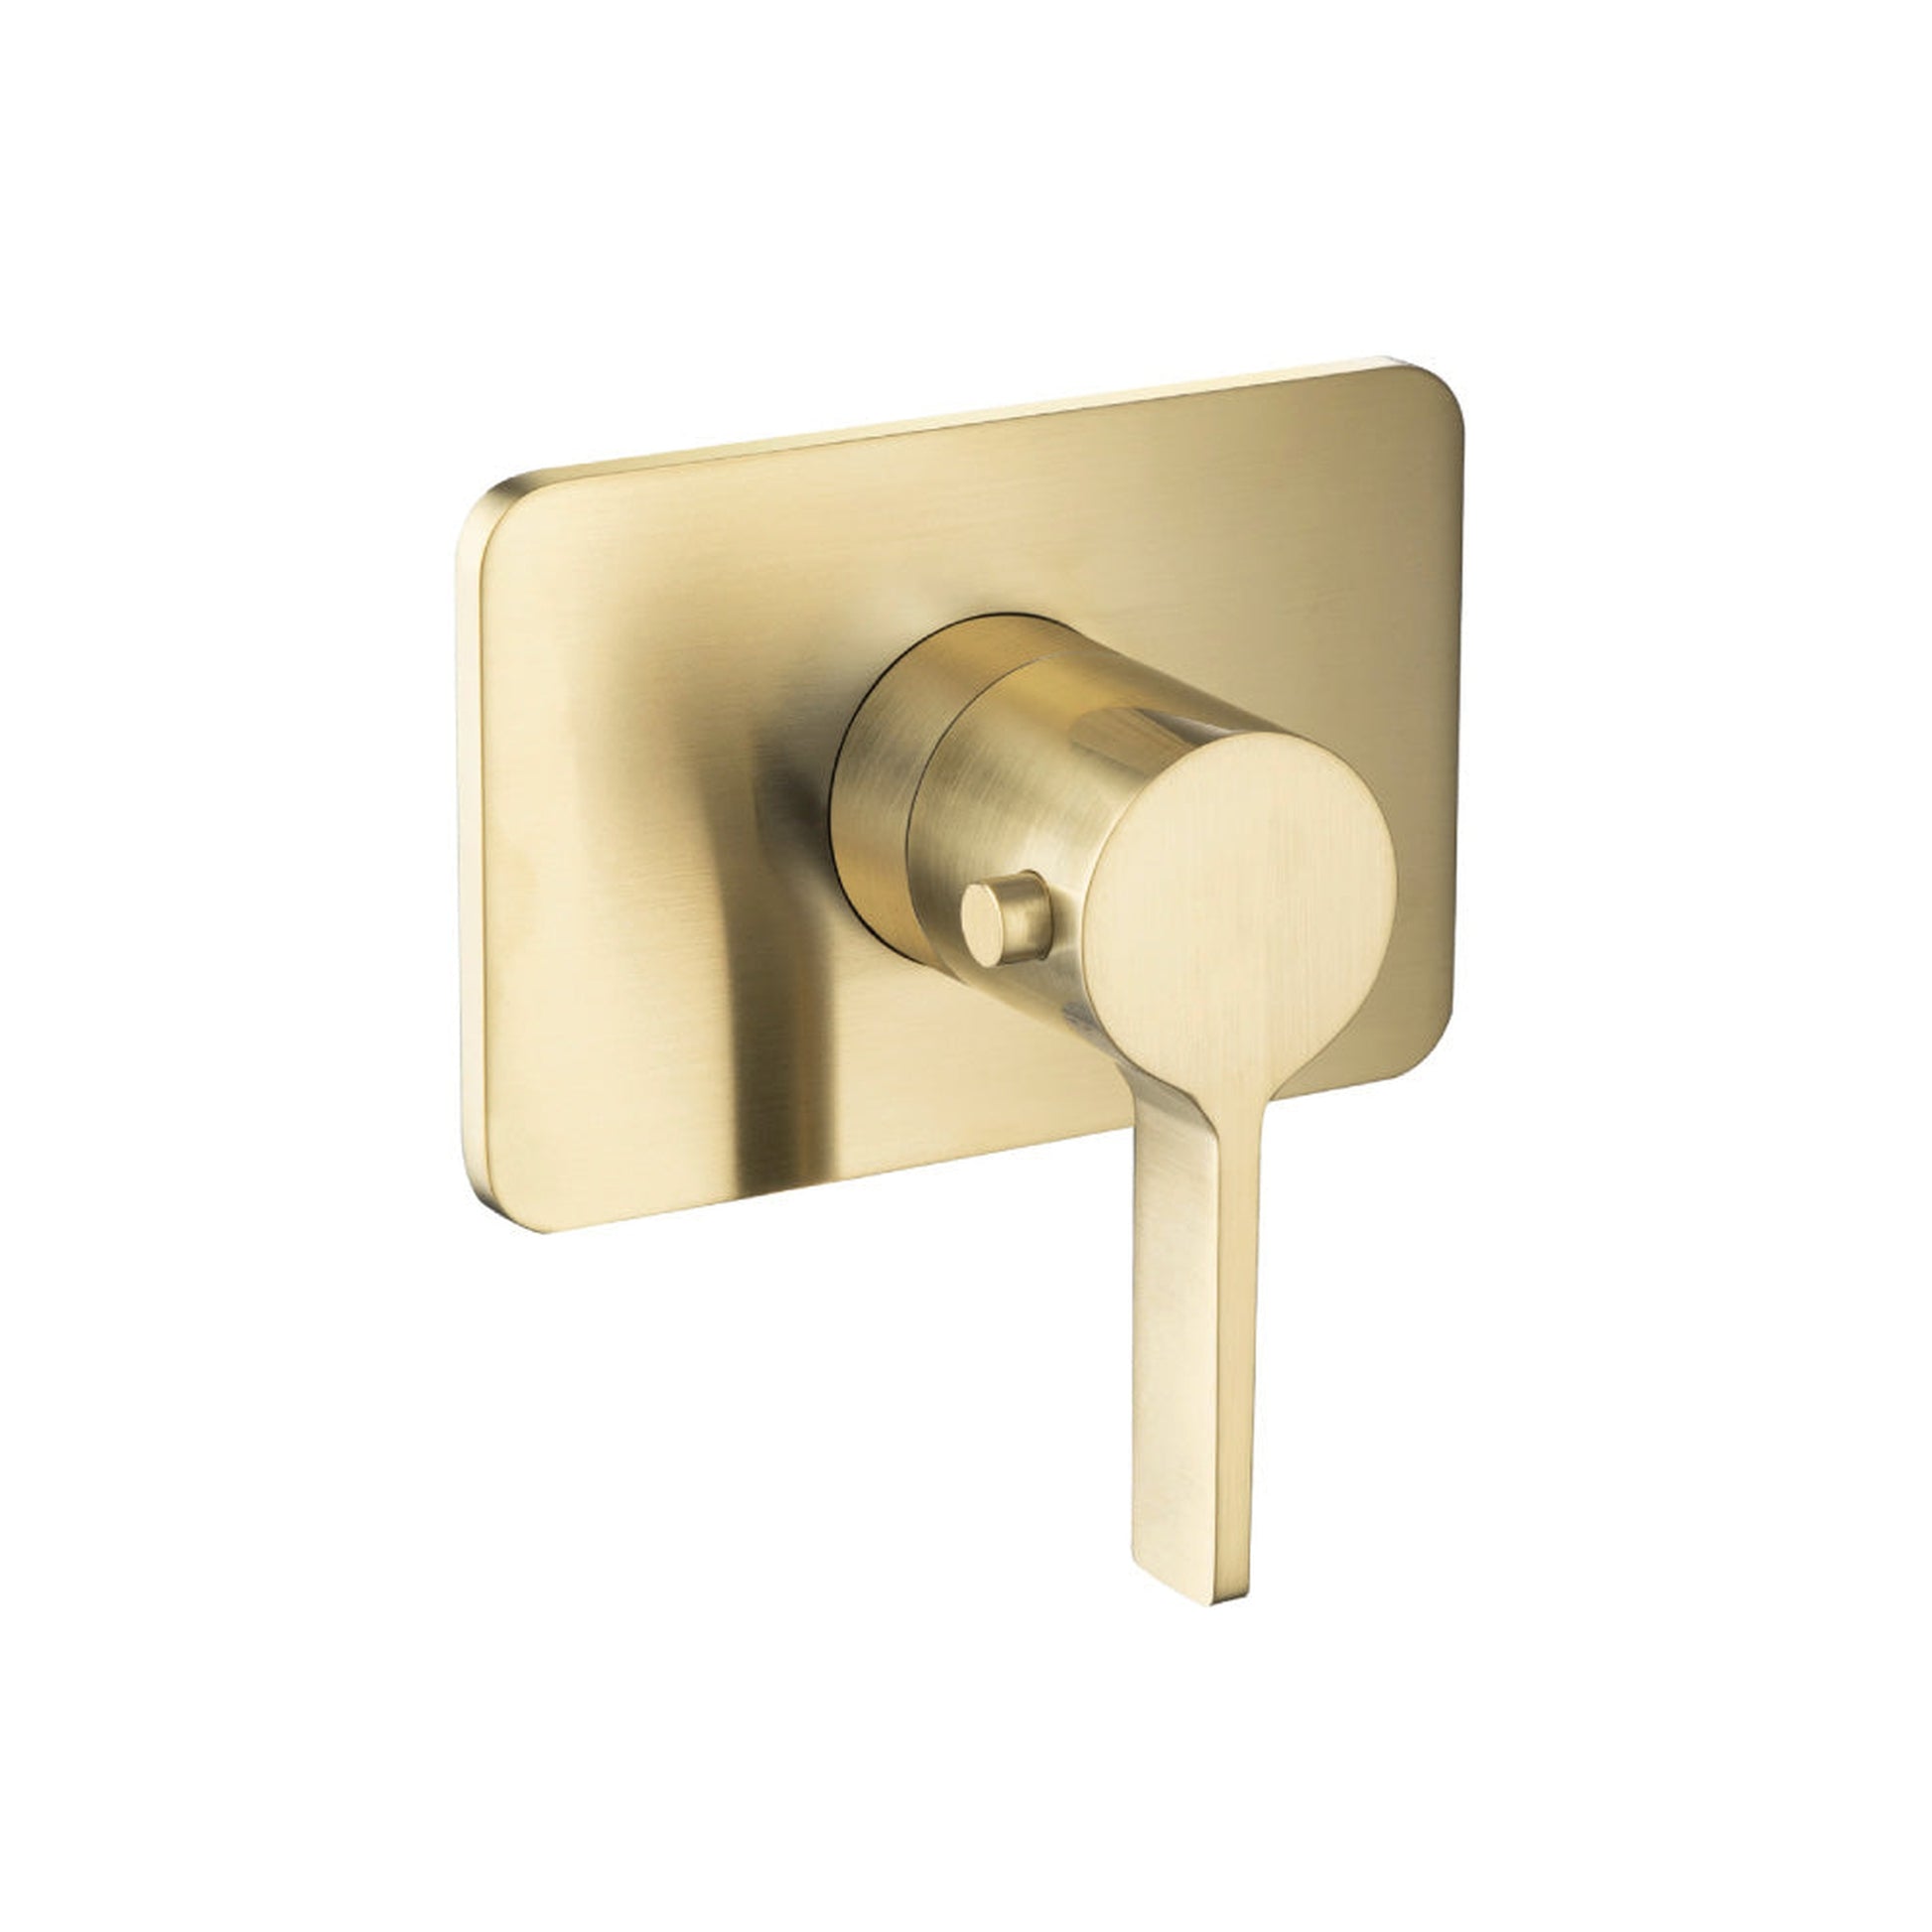 Isenberg Serie 260 3/4" Single Output Thermostatic Valve With Trim in Satin Brass